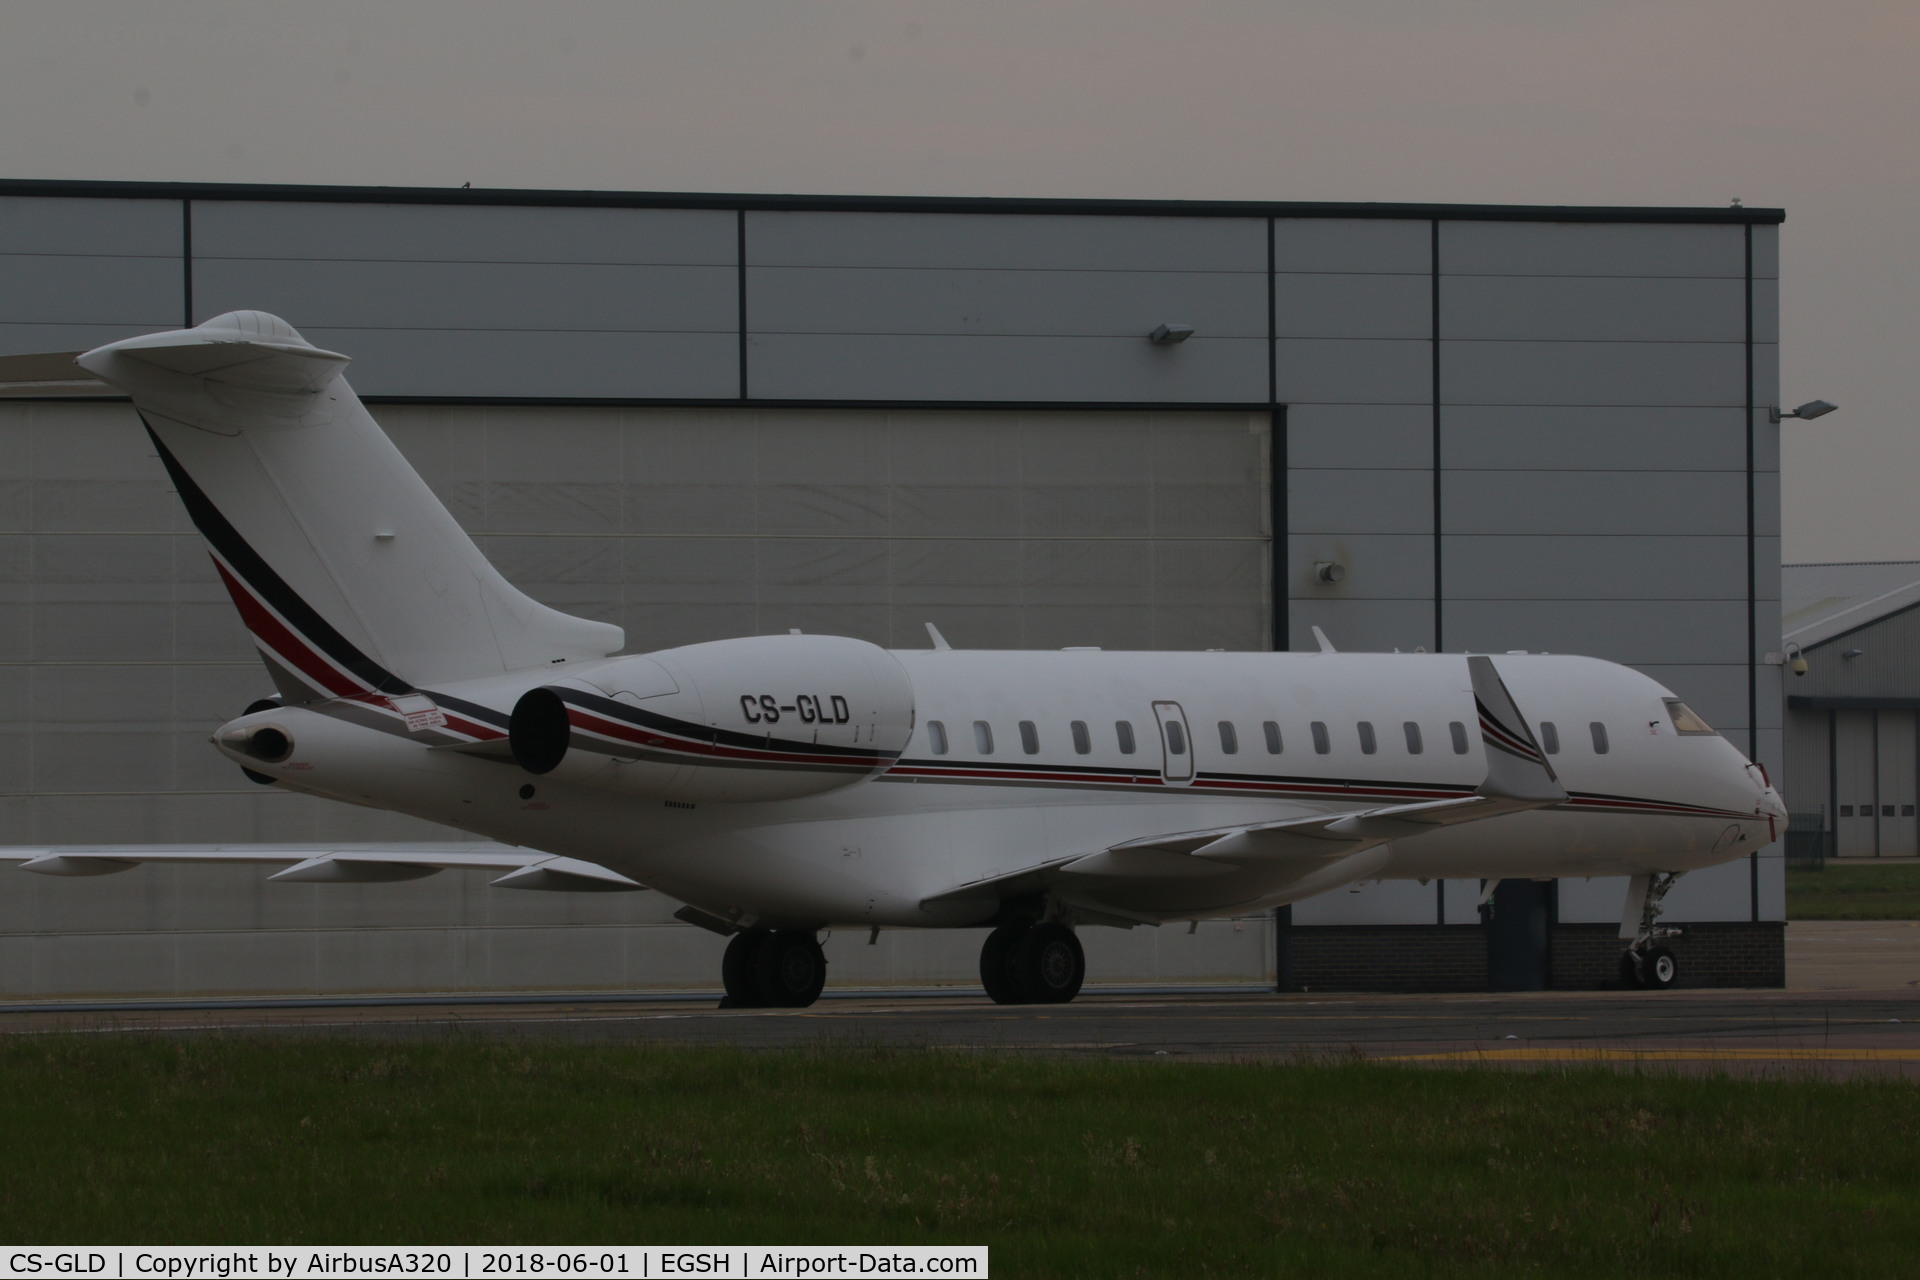 CS-GLD, 2012 Bombardier BD-700-1A10 Global 6000 C/N 9538, End of a days flying parked up in the evening light